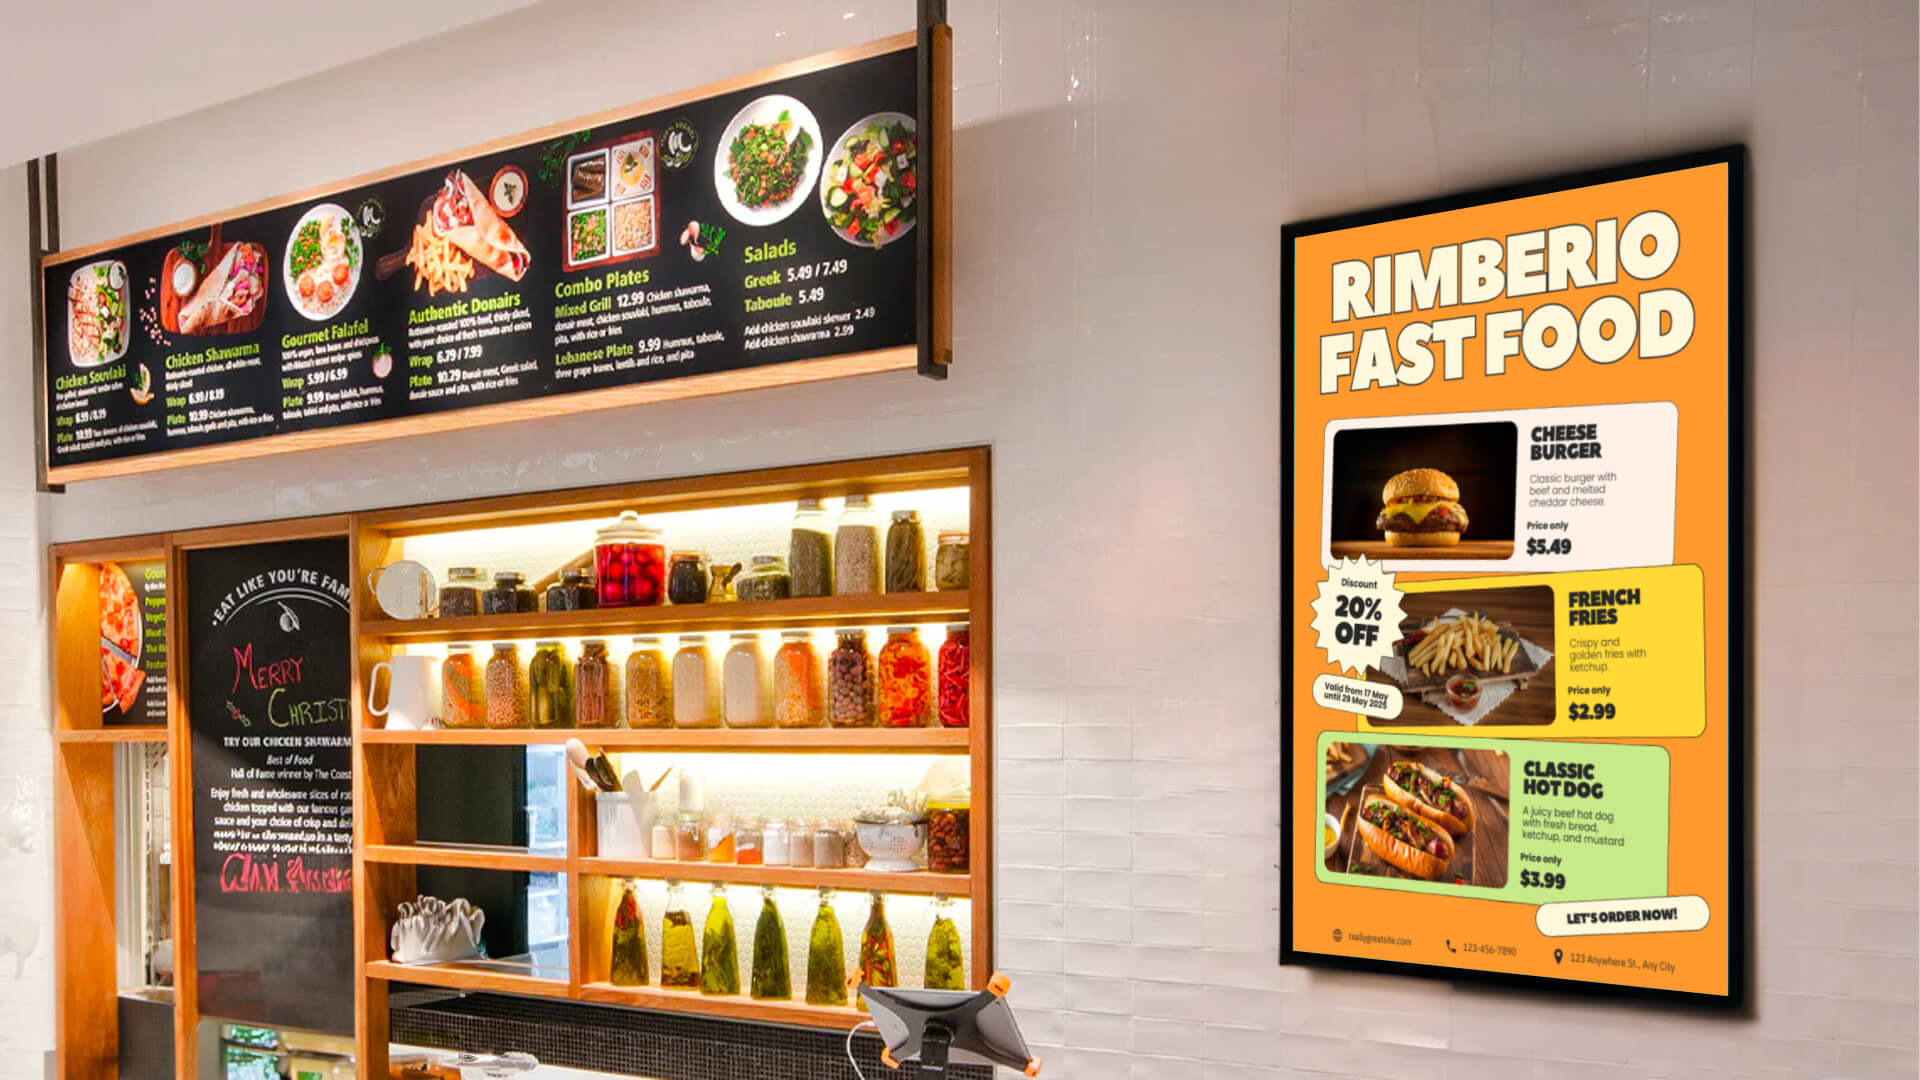 A QSR using digital signage to promote their food and run promotions.